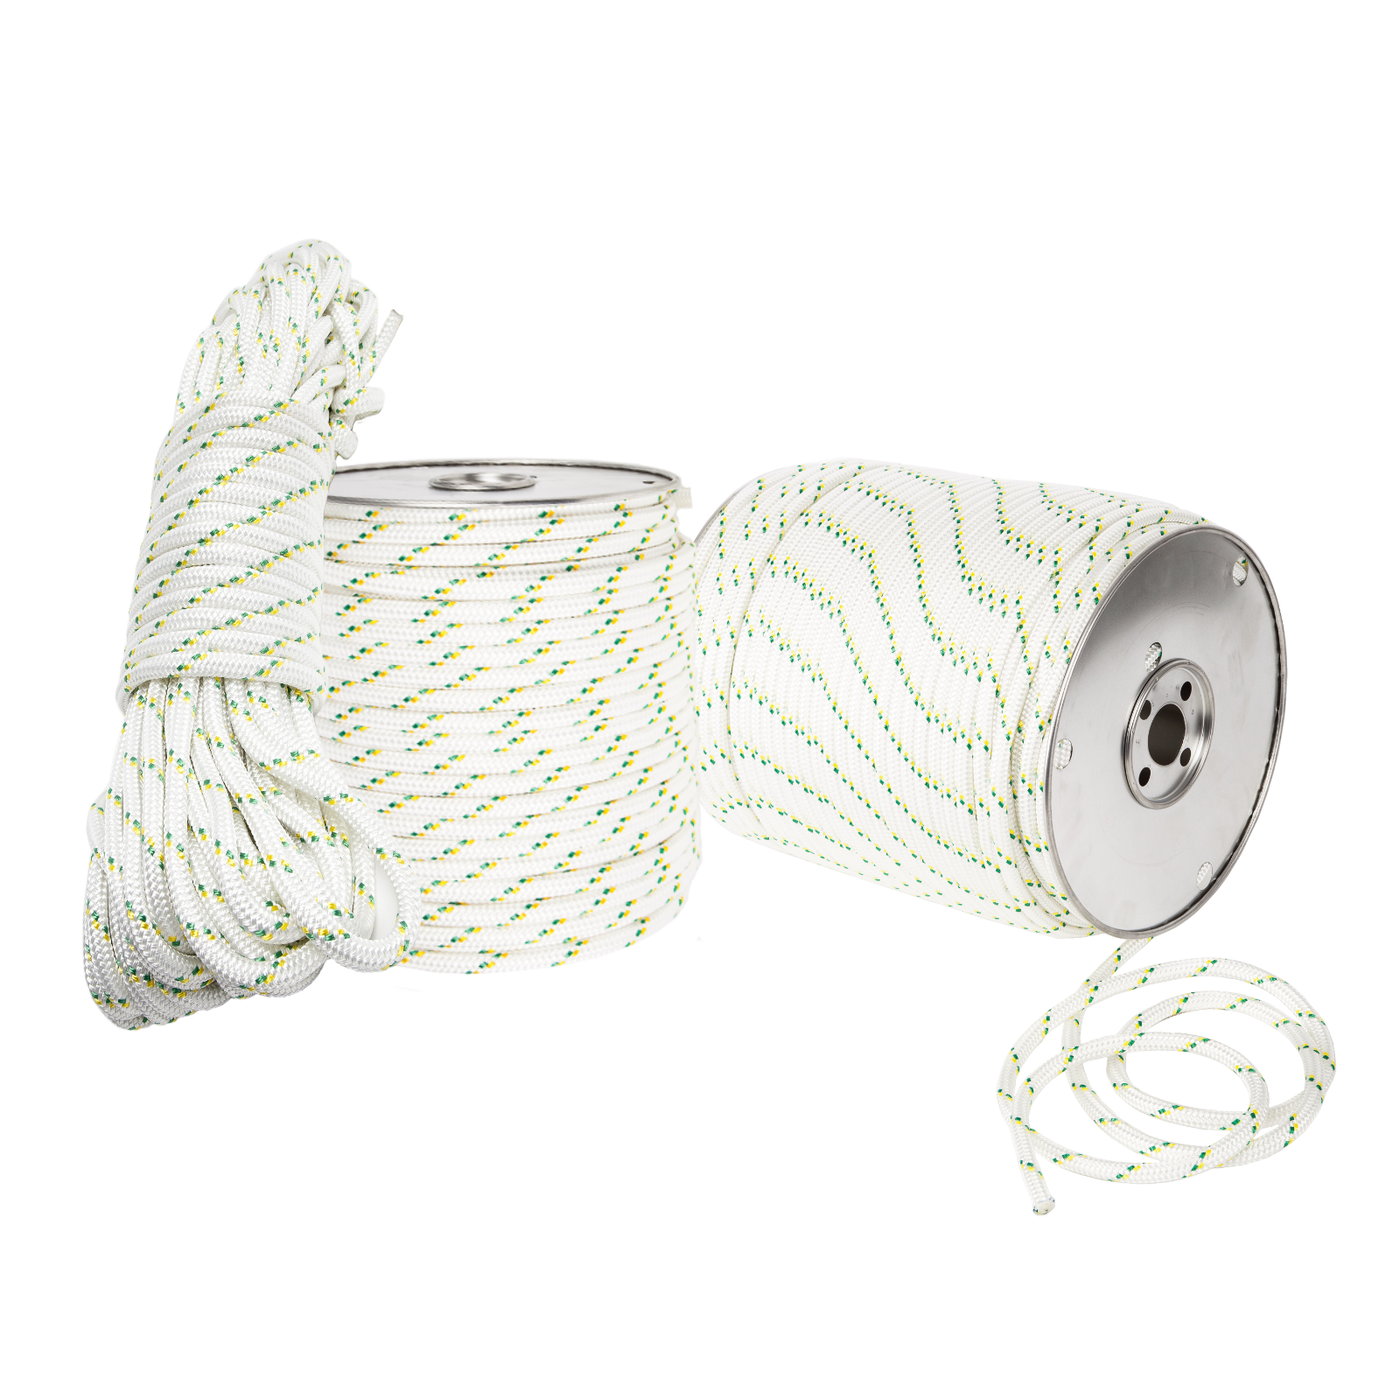 DOUBLE-BRAIDED POLYESTER ROPES Ø 10MM – Portable Winch AT